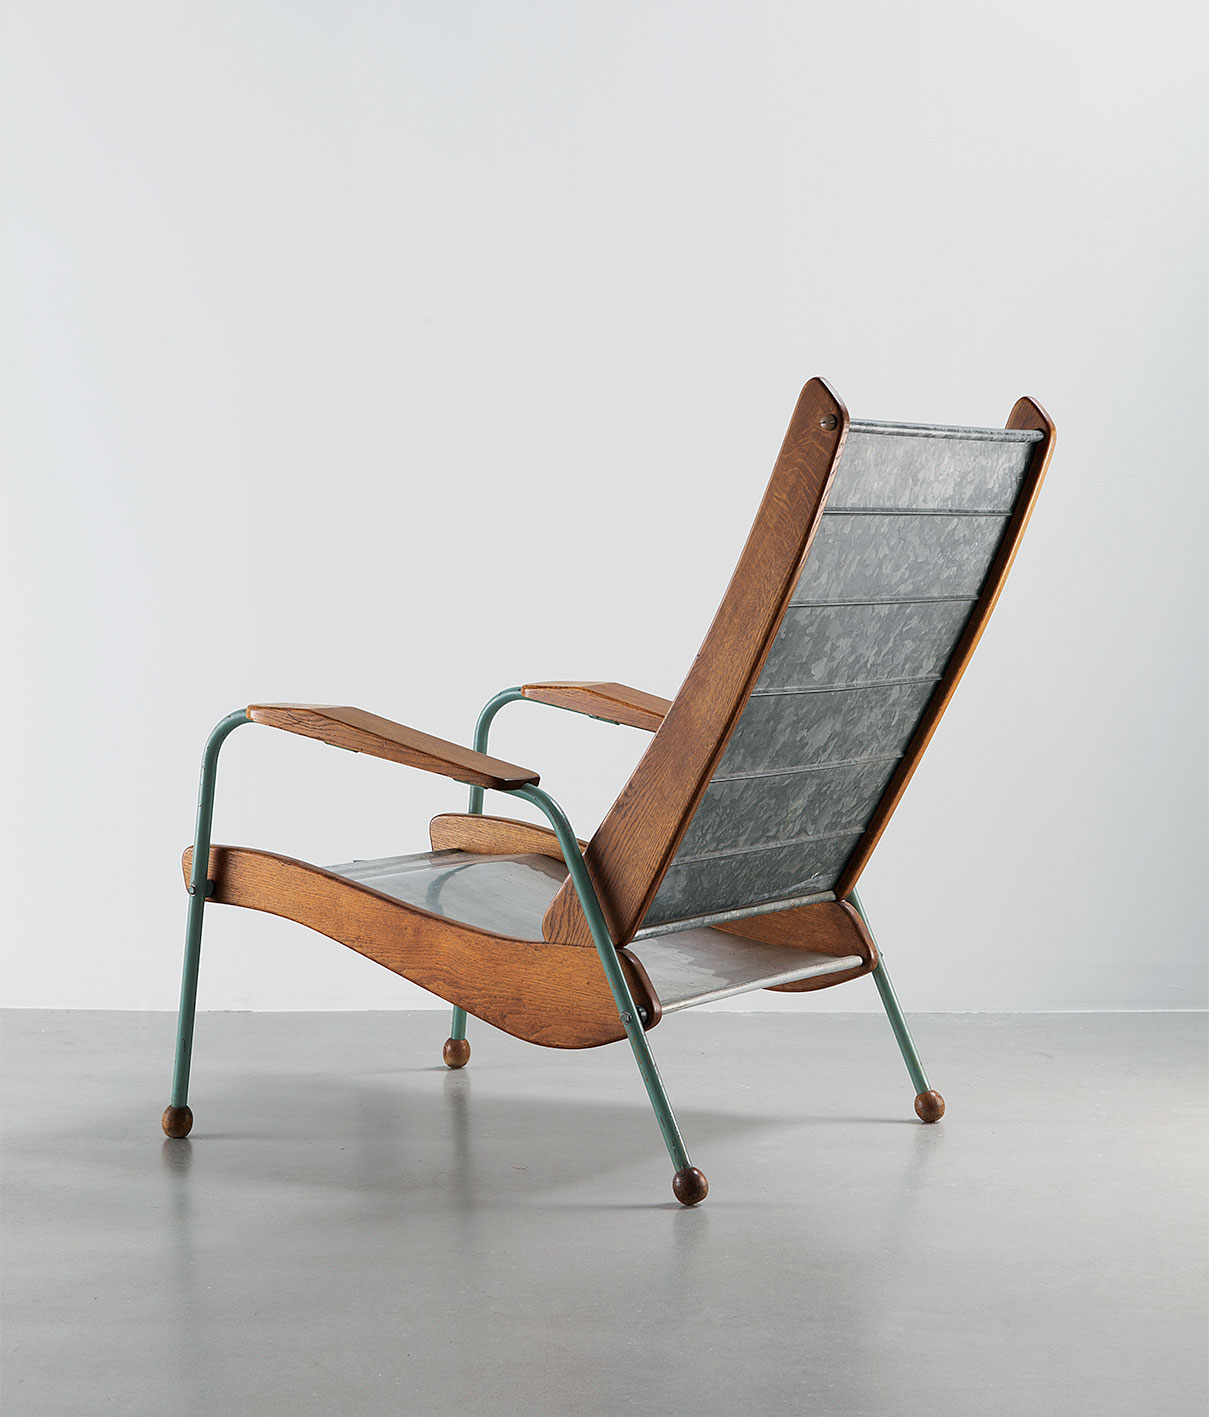 Armchair no. 352, variant with galvanized sheet steel backrest and sheet aluminum seat, ca. 1952.